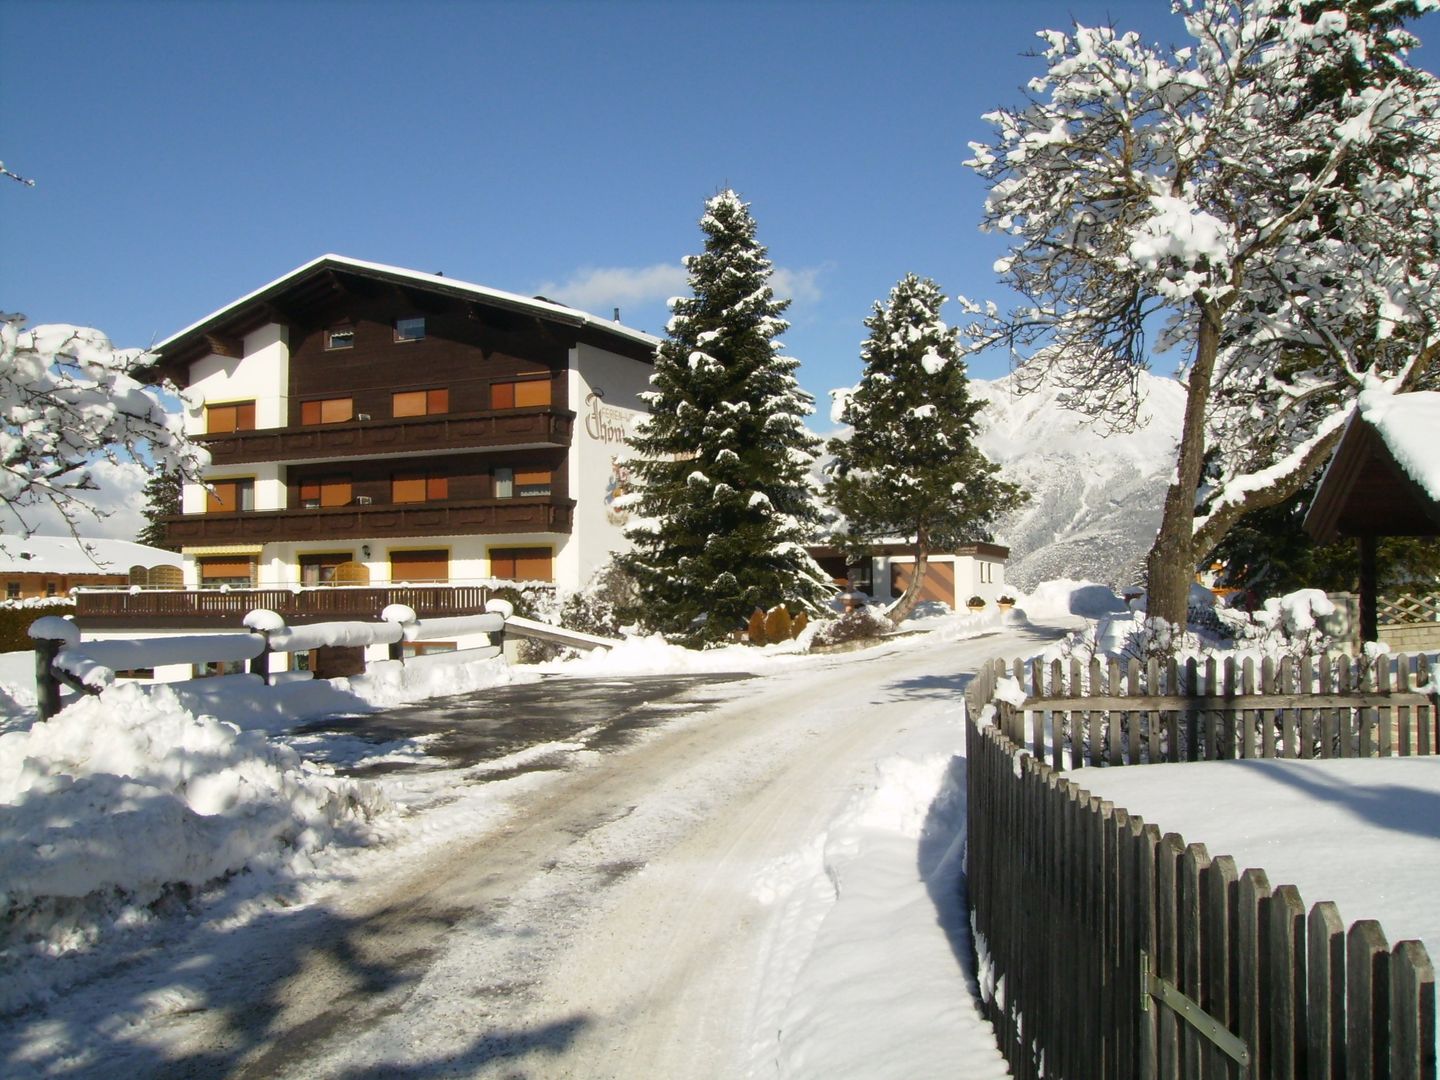 Hotel ∙ - INCL. LIFT PASS Apartment, sleeps 2 (approx. 25 m²), SC - Imst